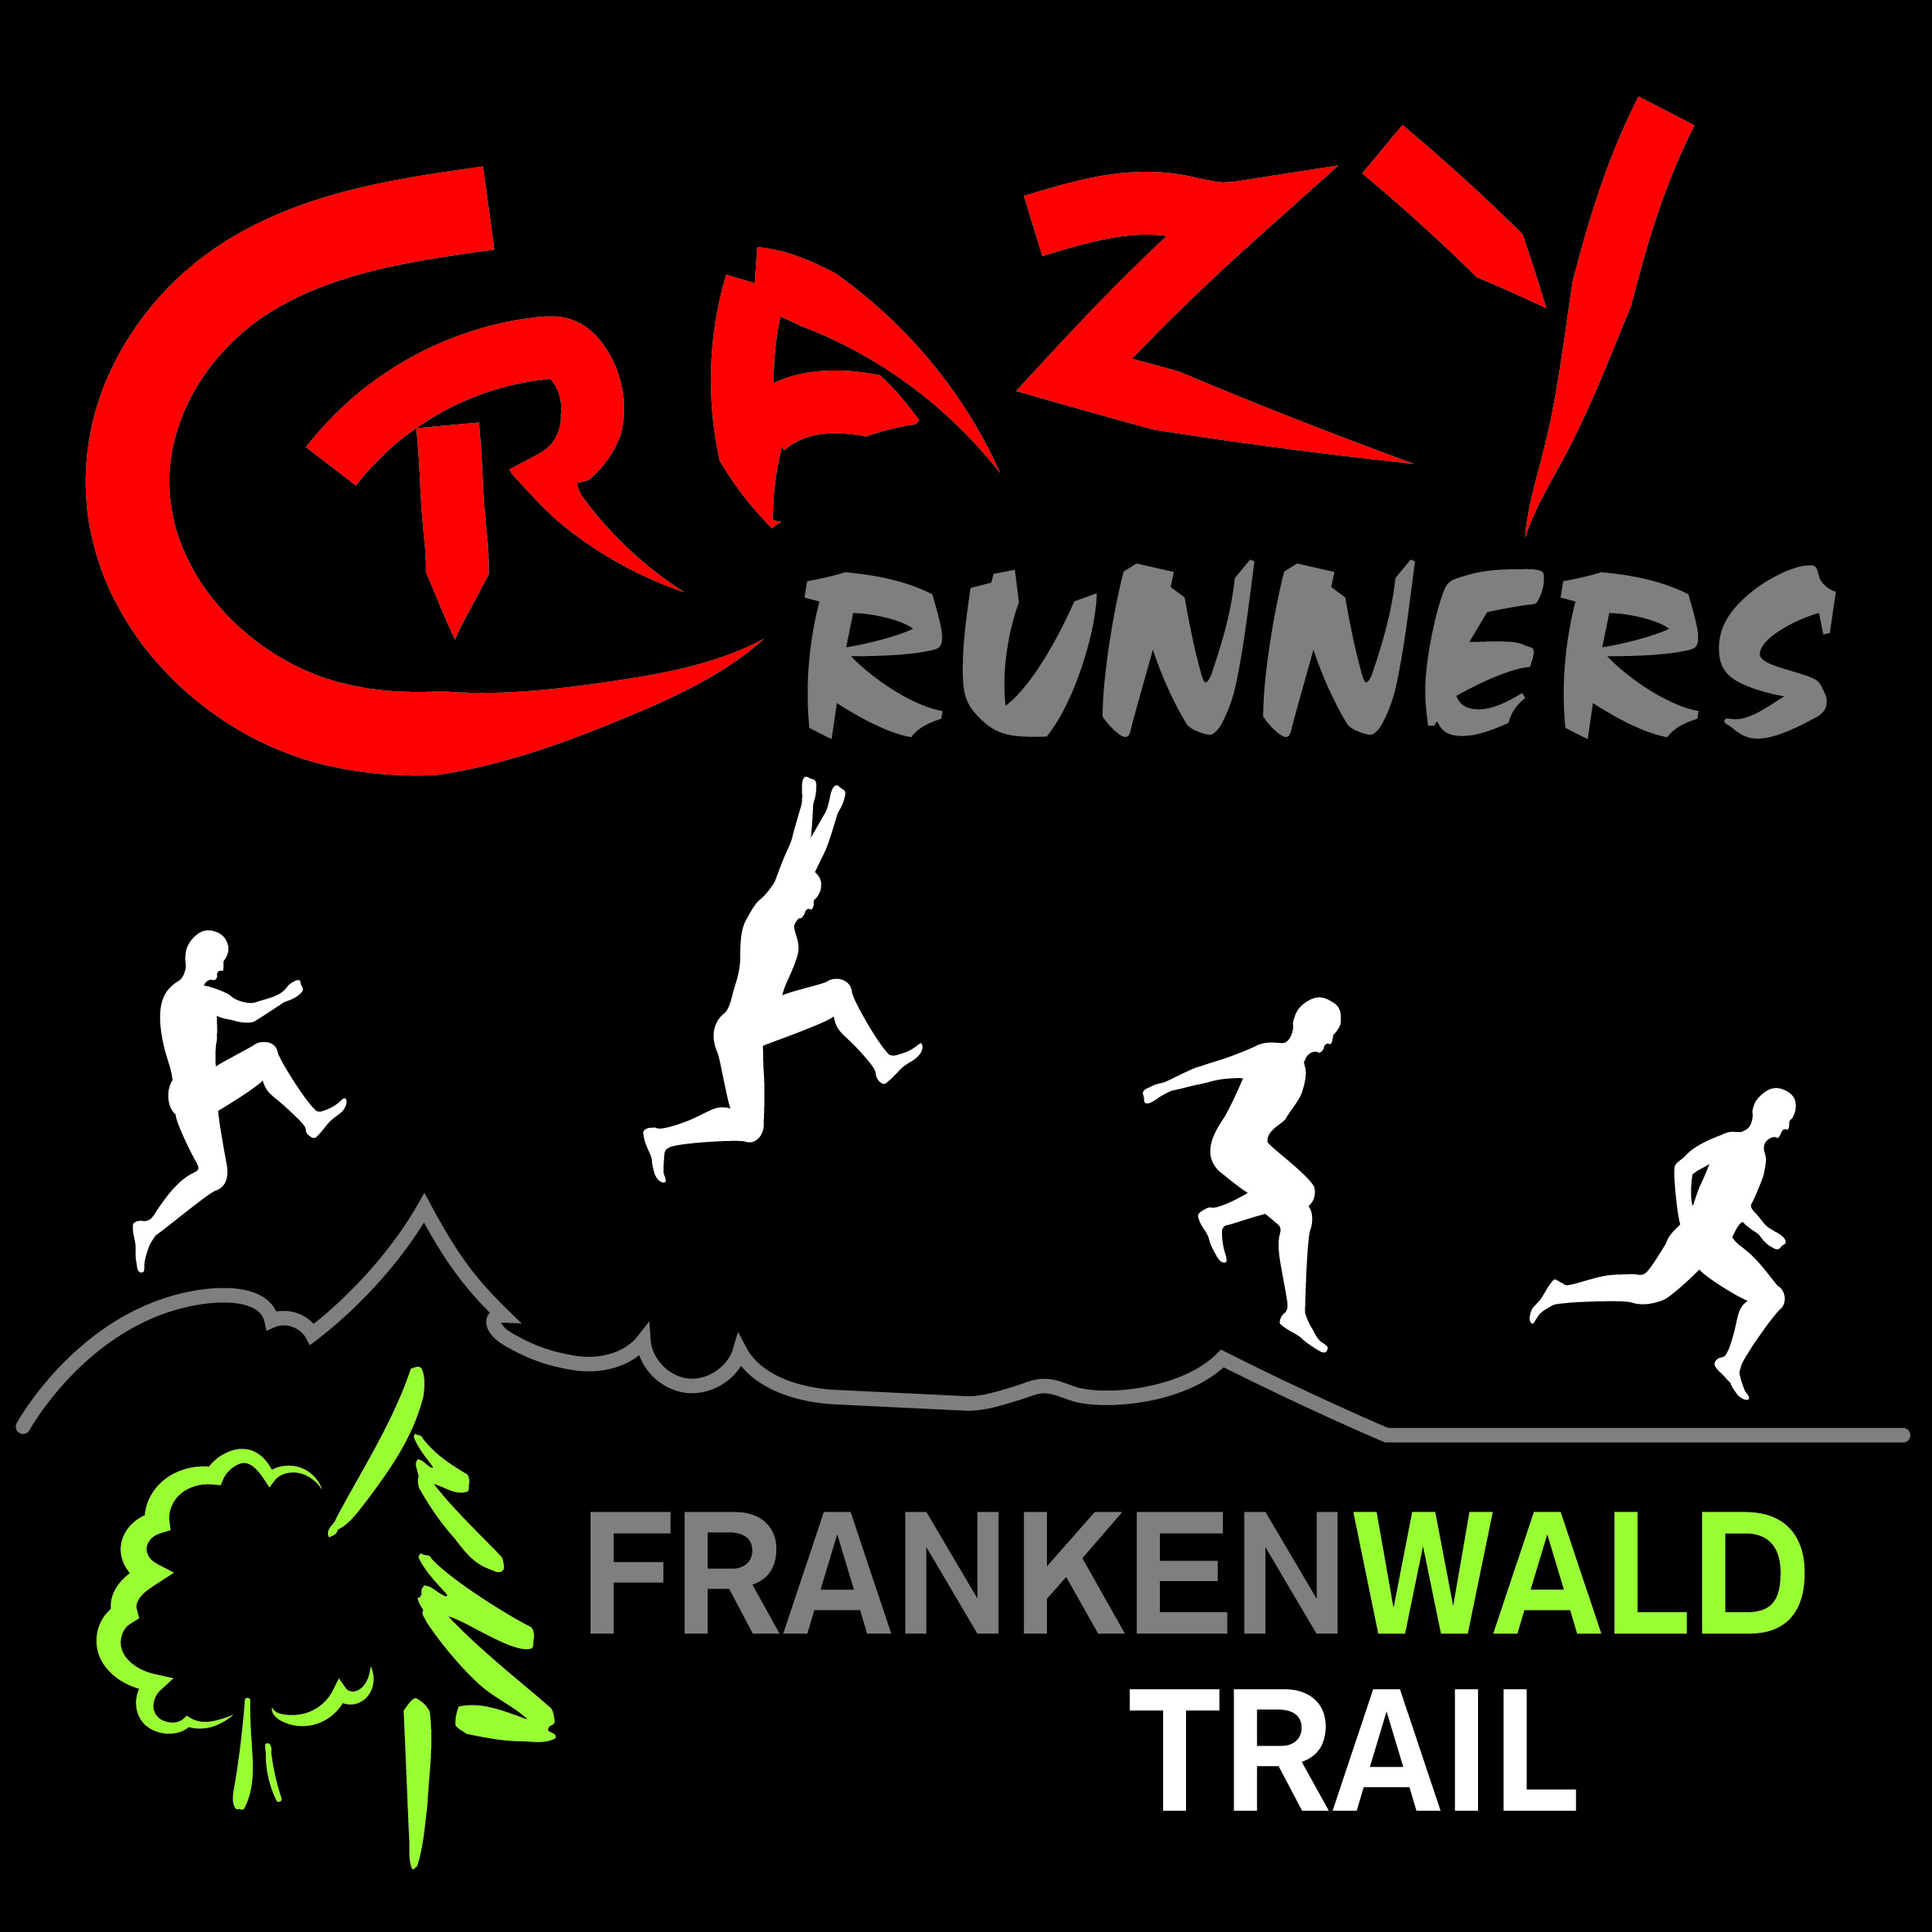 Crazy Runners Frankenwald Trail